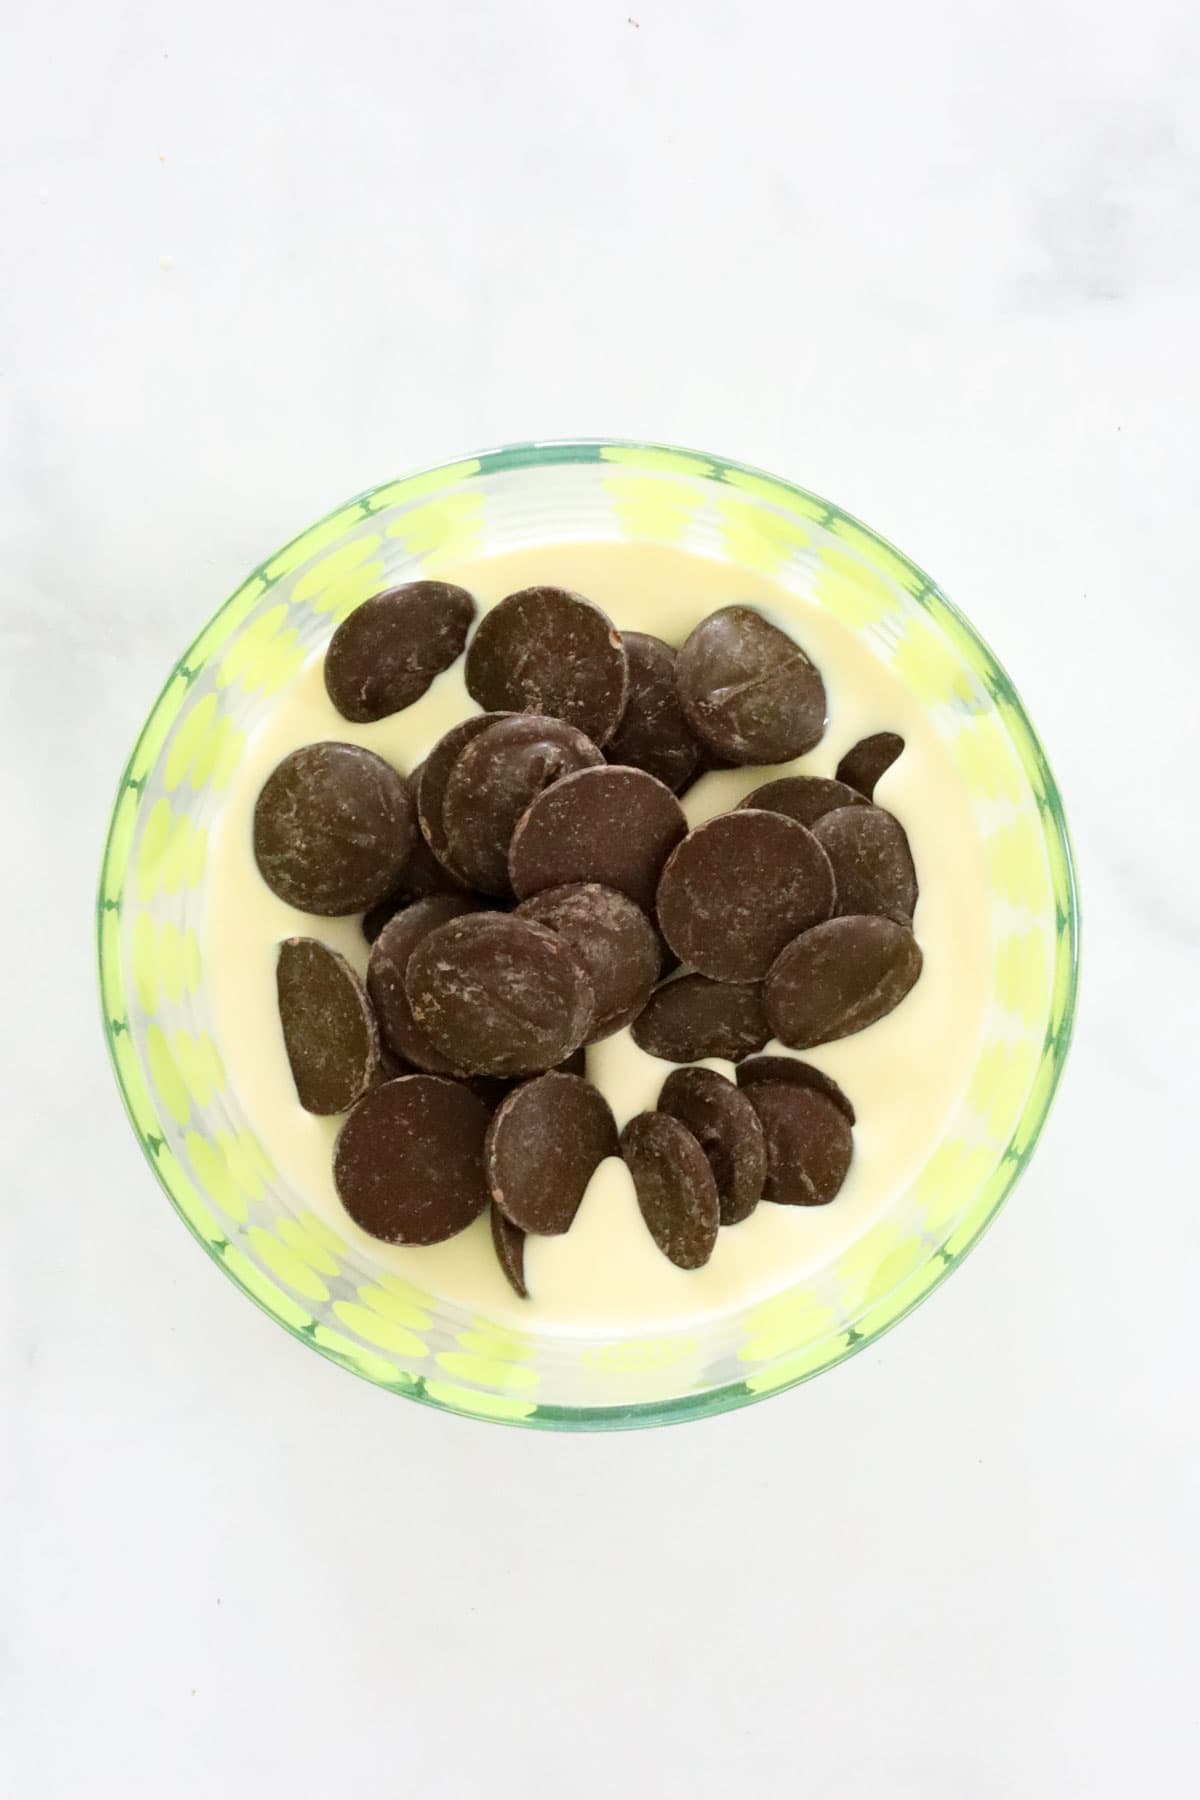 Chocolate melts and cream in a mixing bowl.